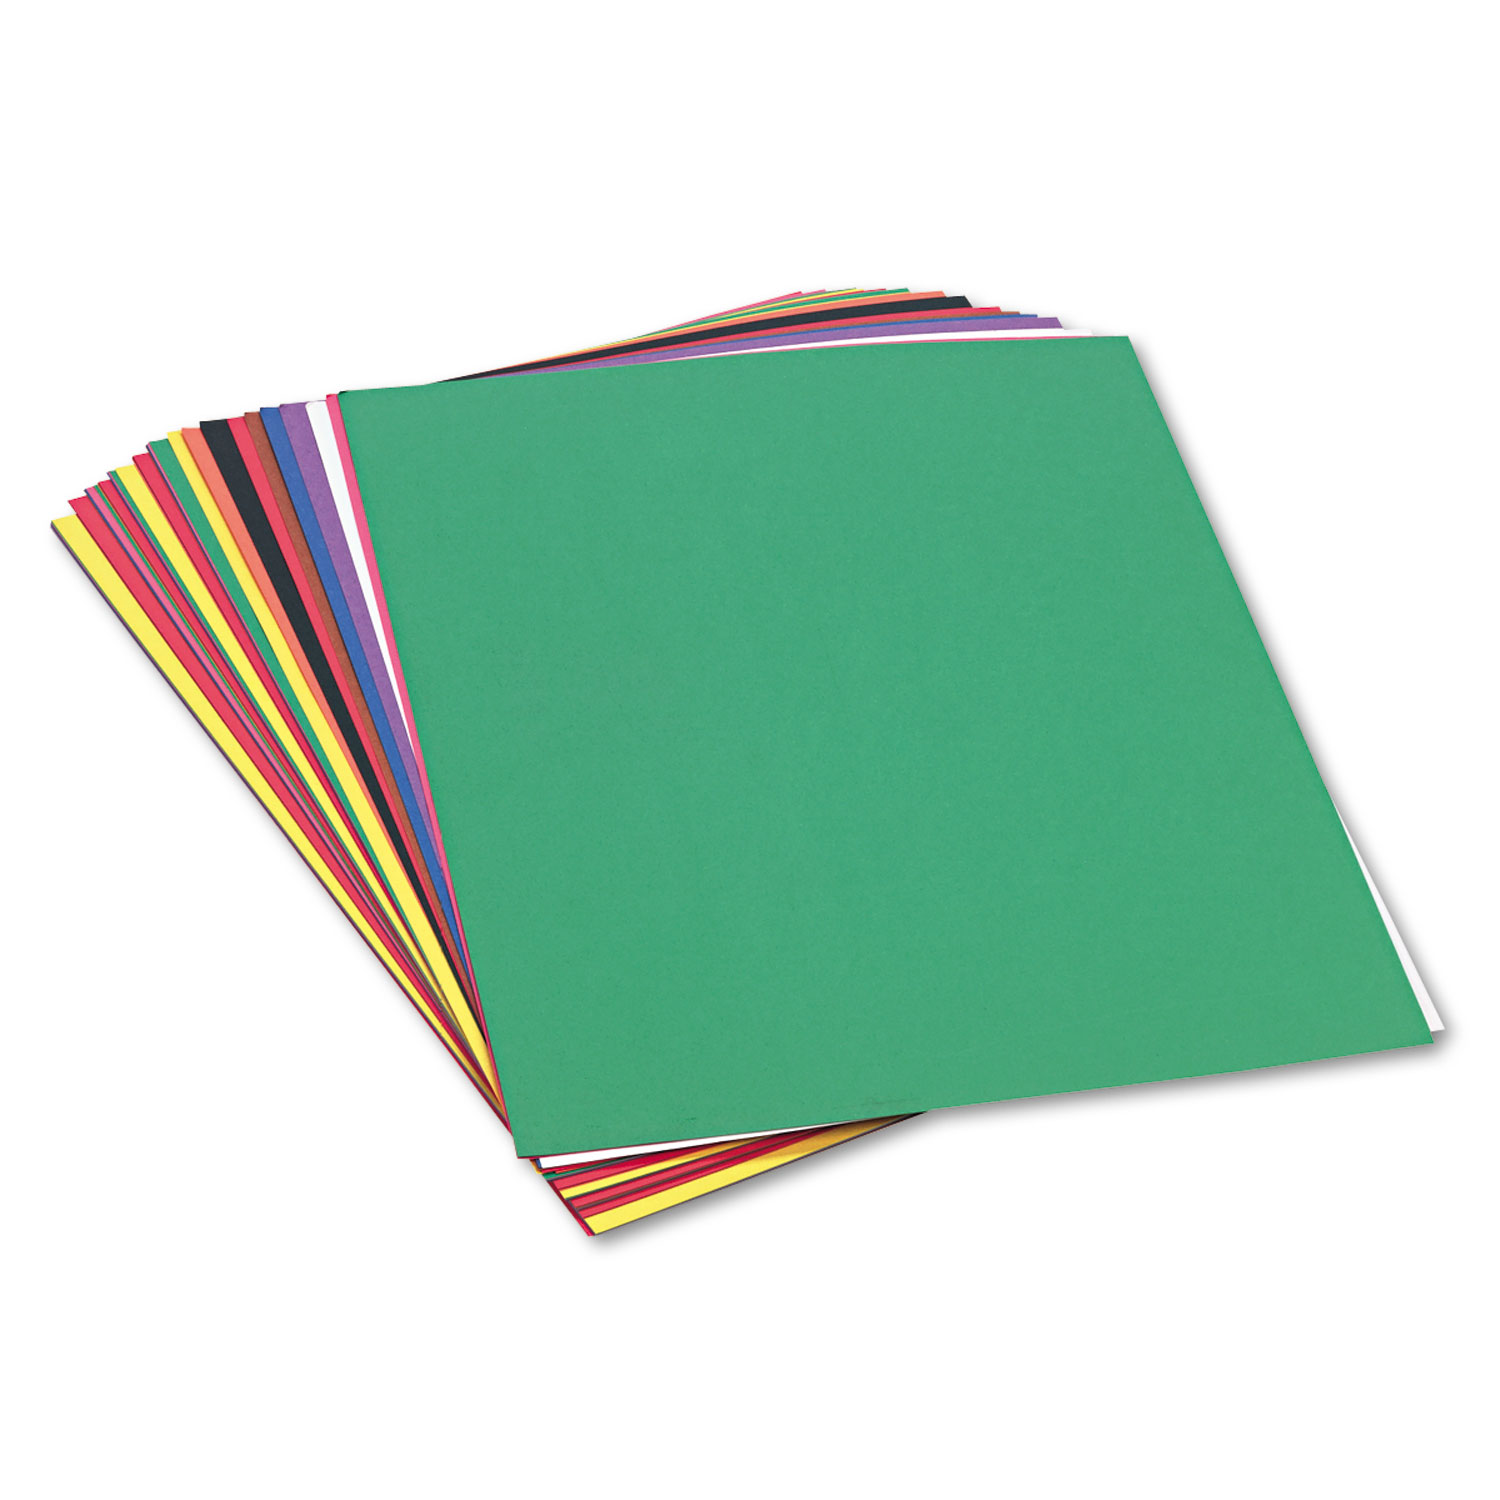 Construction Paper, 58 lbs., 24 x 36, Assorted, 50 Sheets/Pack